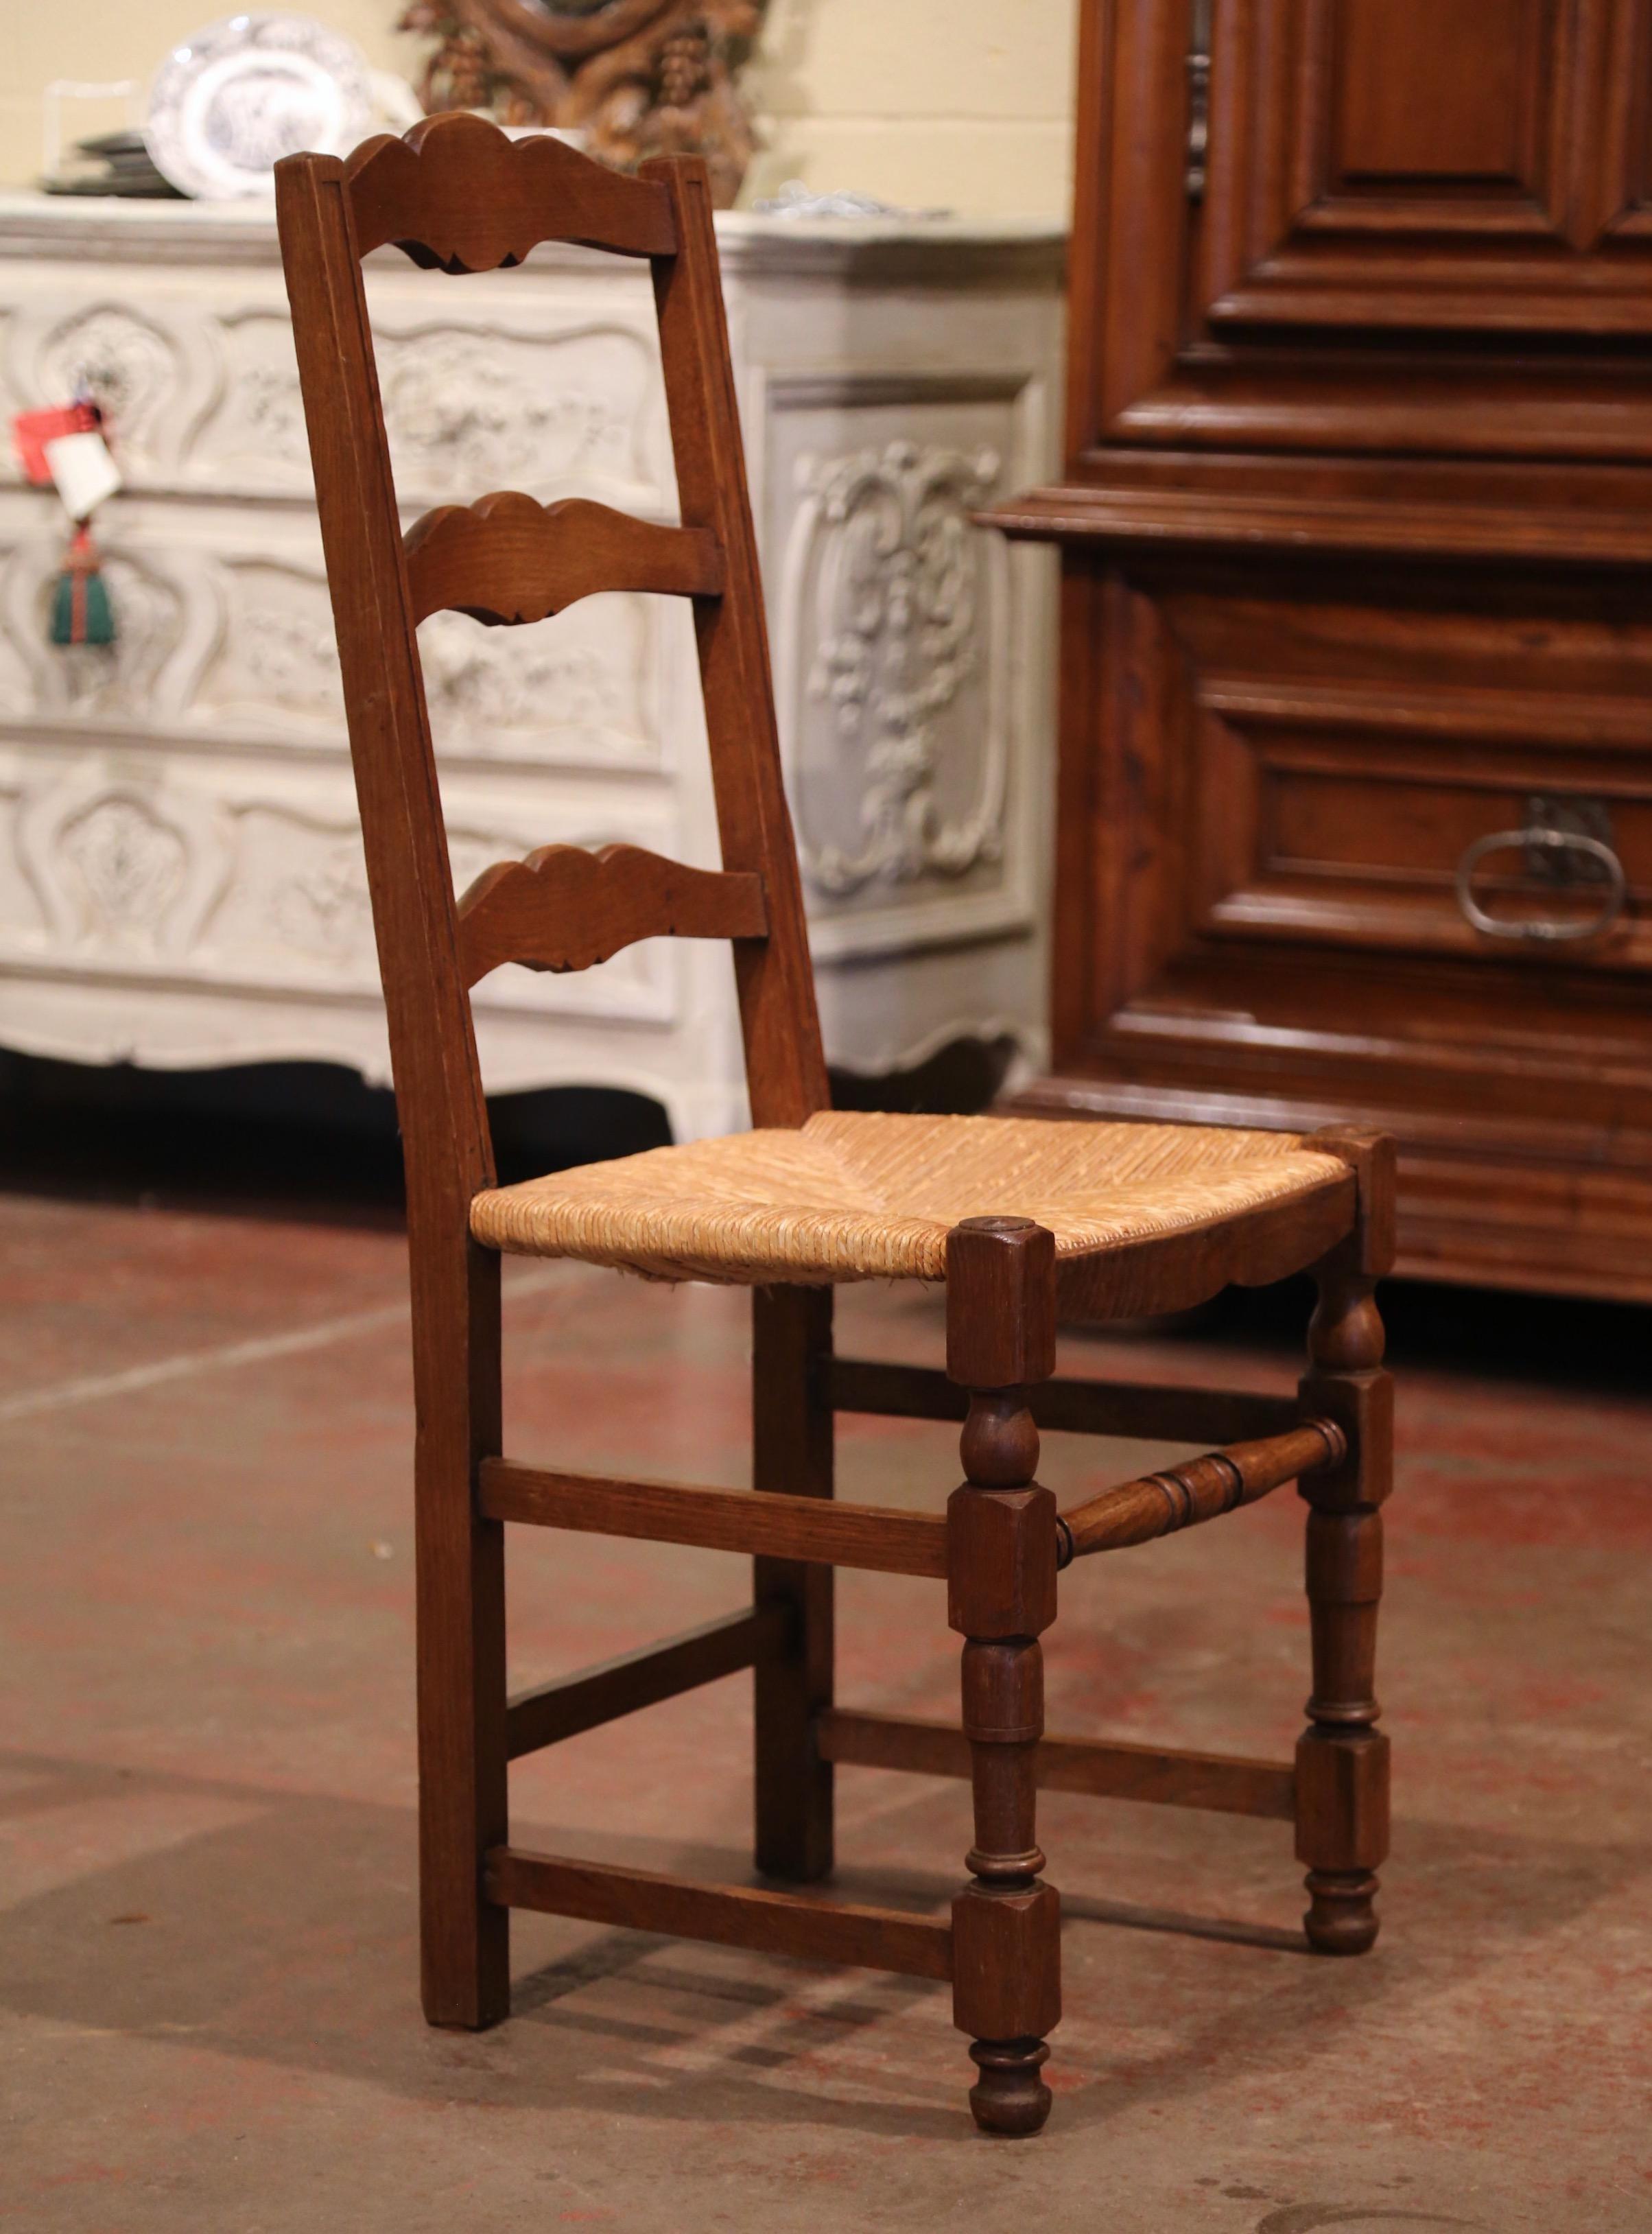 These eight elegant country chairs were crafted in Normandy France, circa 1980. Carved from solid oak, each chair has three scalloped ladders across the pitched back which give each chair great support and comfort. The seat has woven rush surface